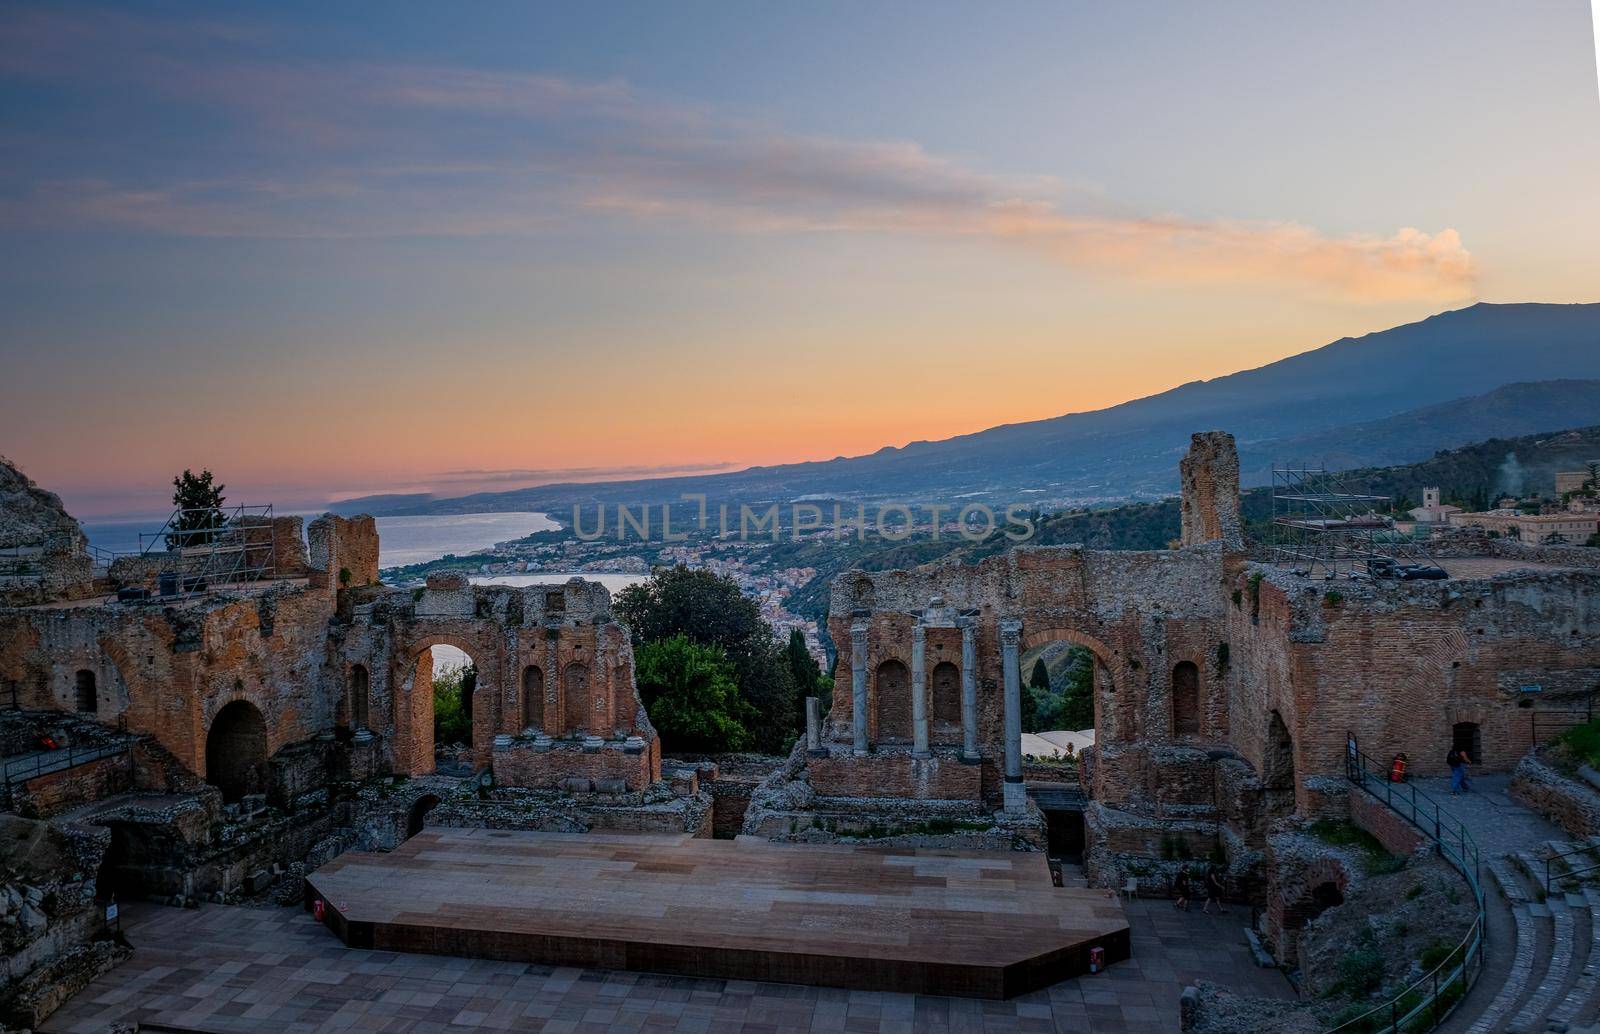 Ruins of Ancient Greek theatre in Taormina on background of Etna Volcano, Italy. Taormina located in Metropolitan City of Messina, on east coast of island of Sicily Europe